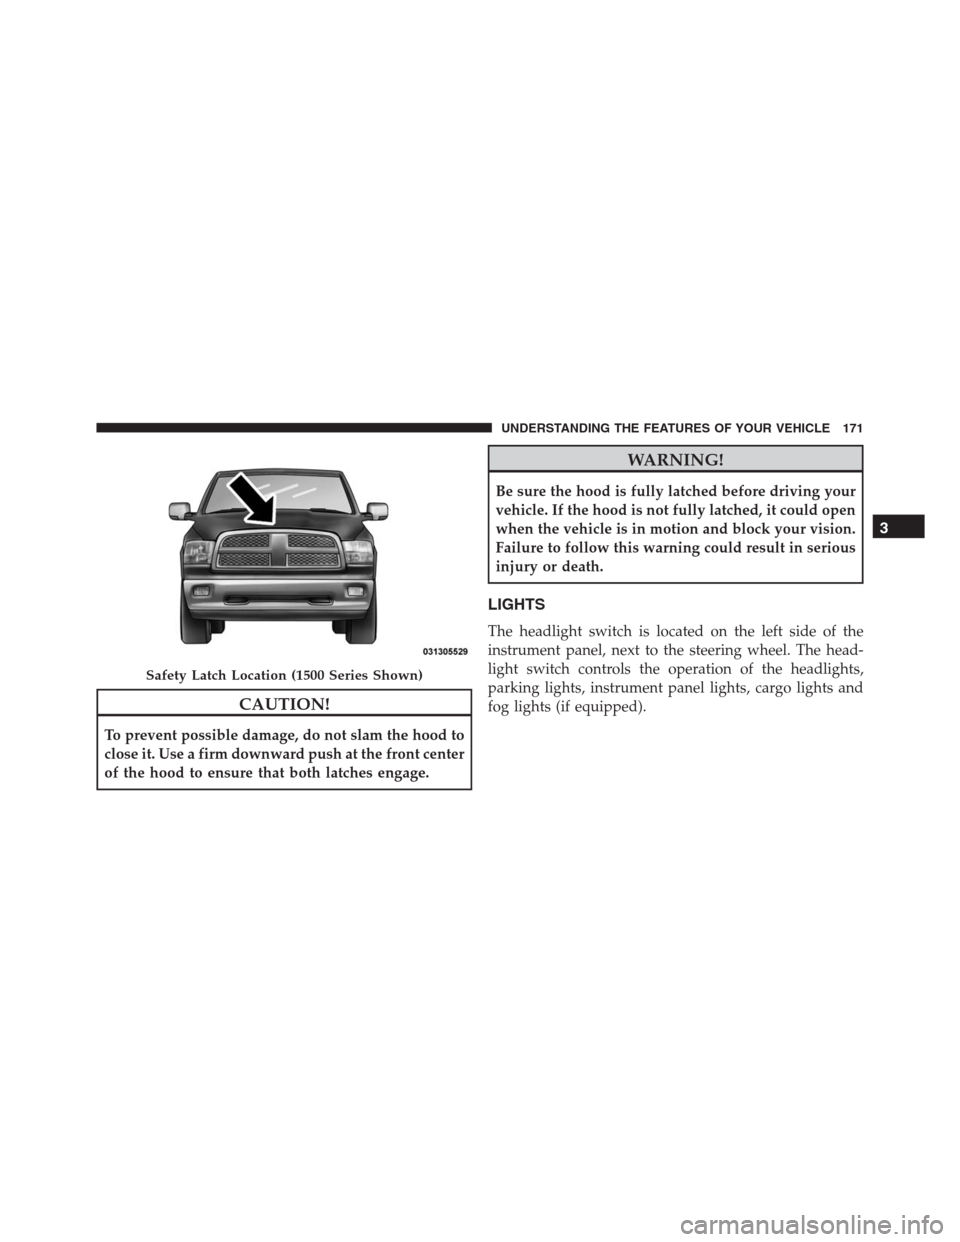 Ram 1500 2016 User Guide CAUTION!
To prevent possible damage, do not slam the hood to
close it. Use a firm downward push at the front center
of the hood to ensure that both latches engage.
WARNING!
Be sure the hood is fully l